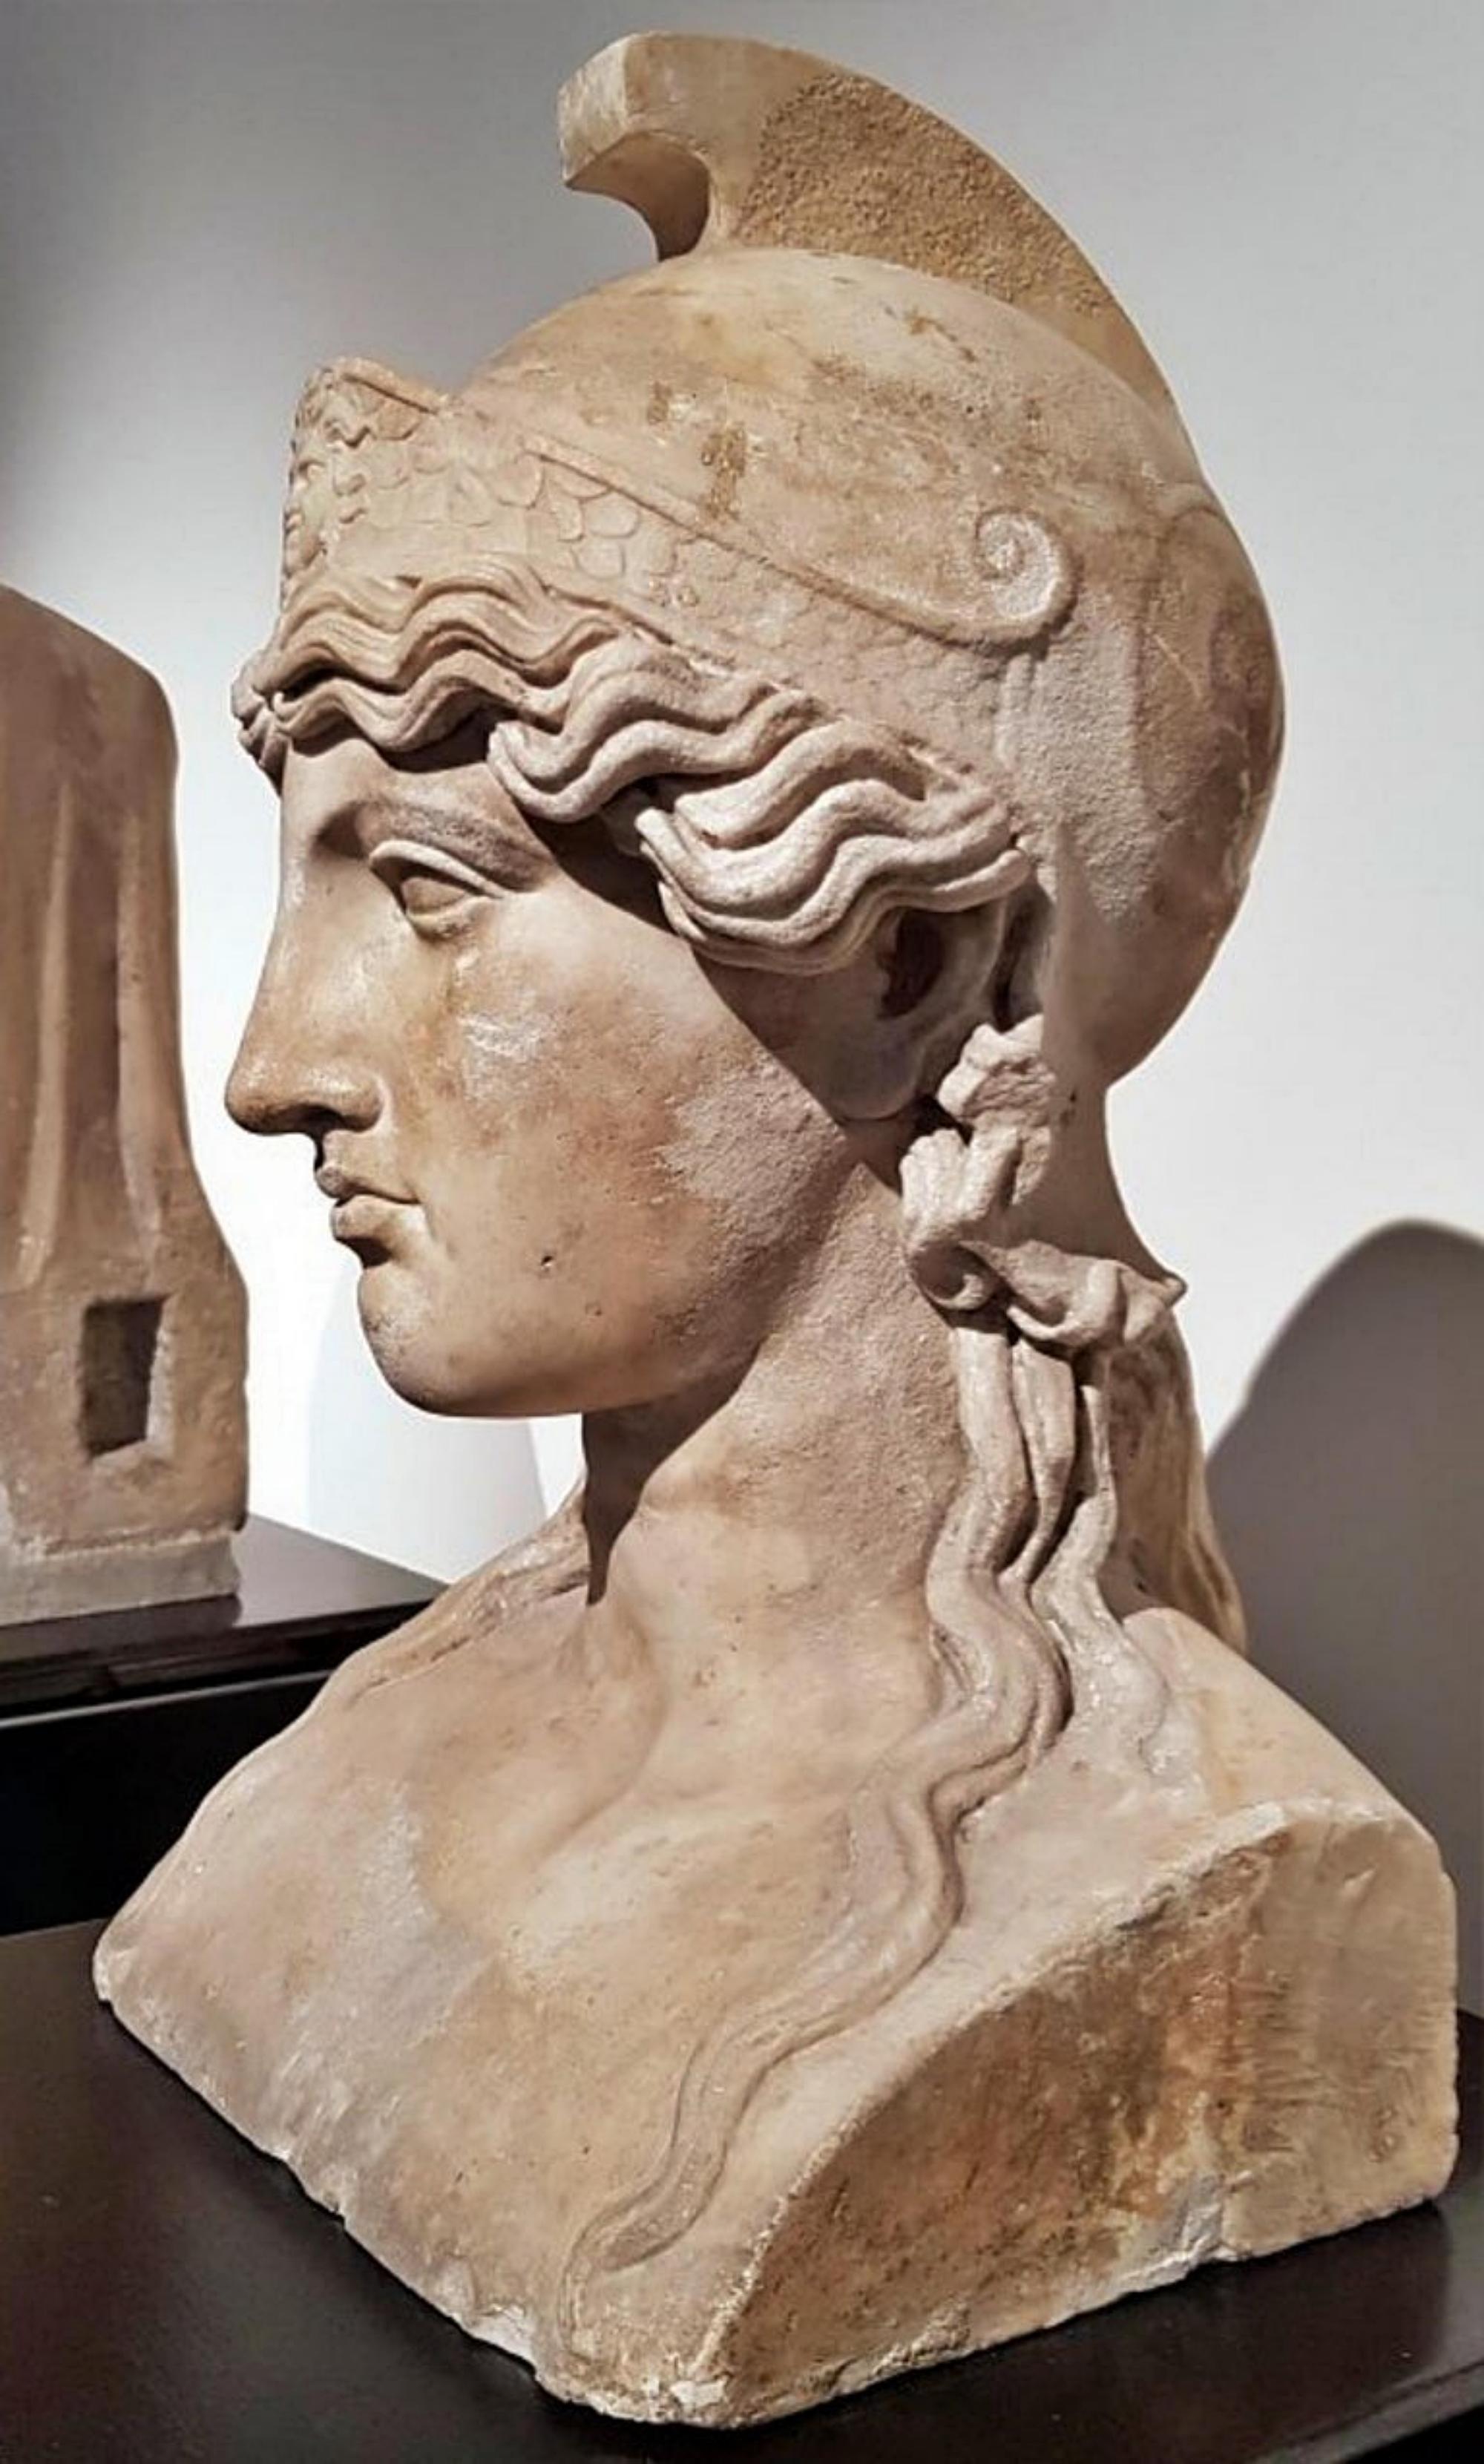 Herm in Terracotta of the Athena of the National Museum of Naples early 20th Century

Herm of Athena in terracotta.
The cast was made on the hand-modeled copy.
Superb academic copy, extremely faithful, see comparison photos. L'Erma, inventoried with